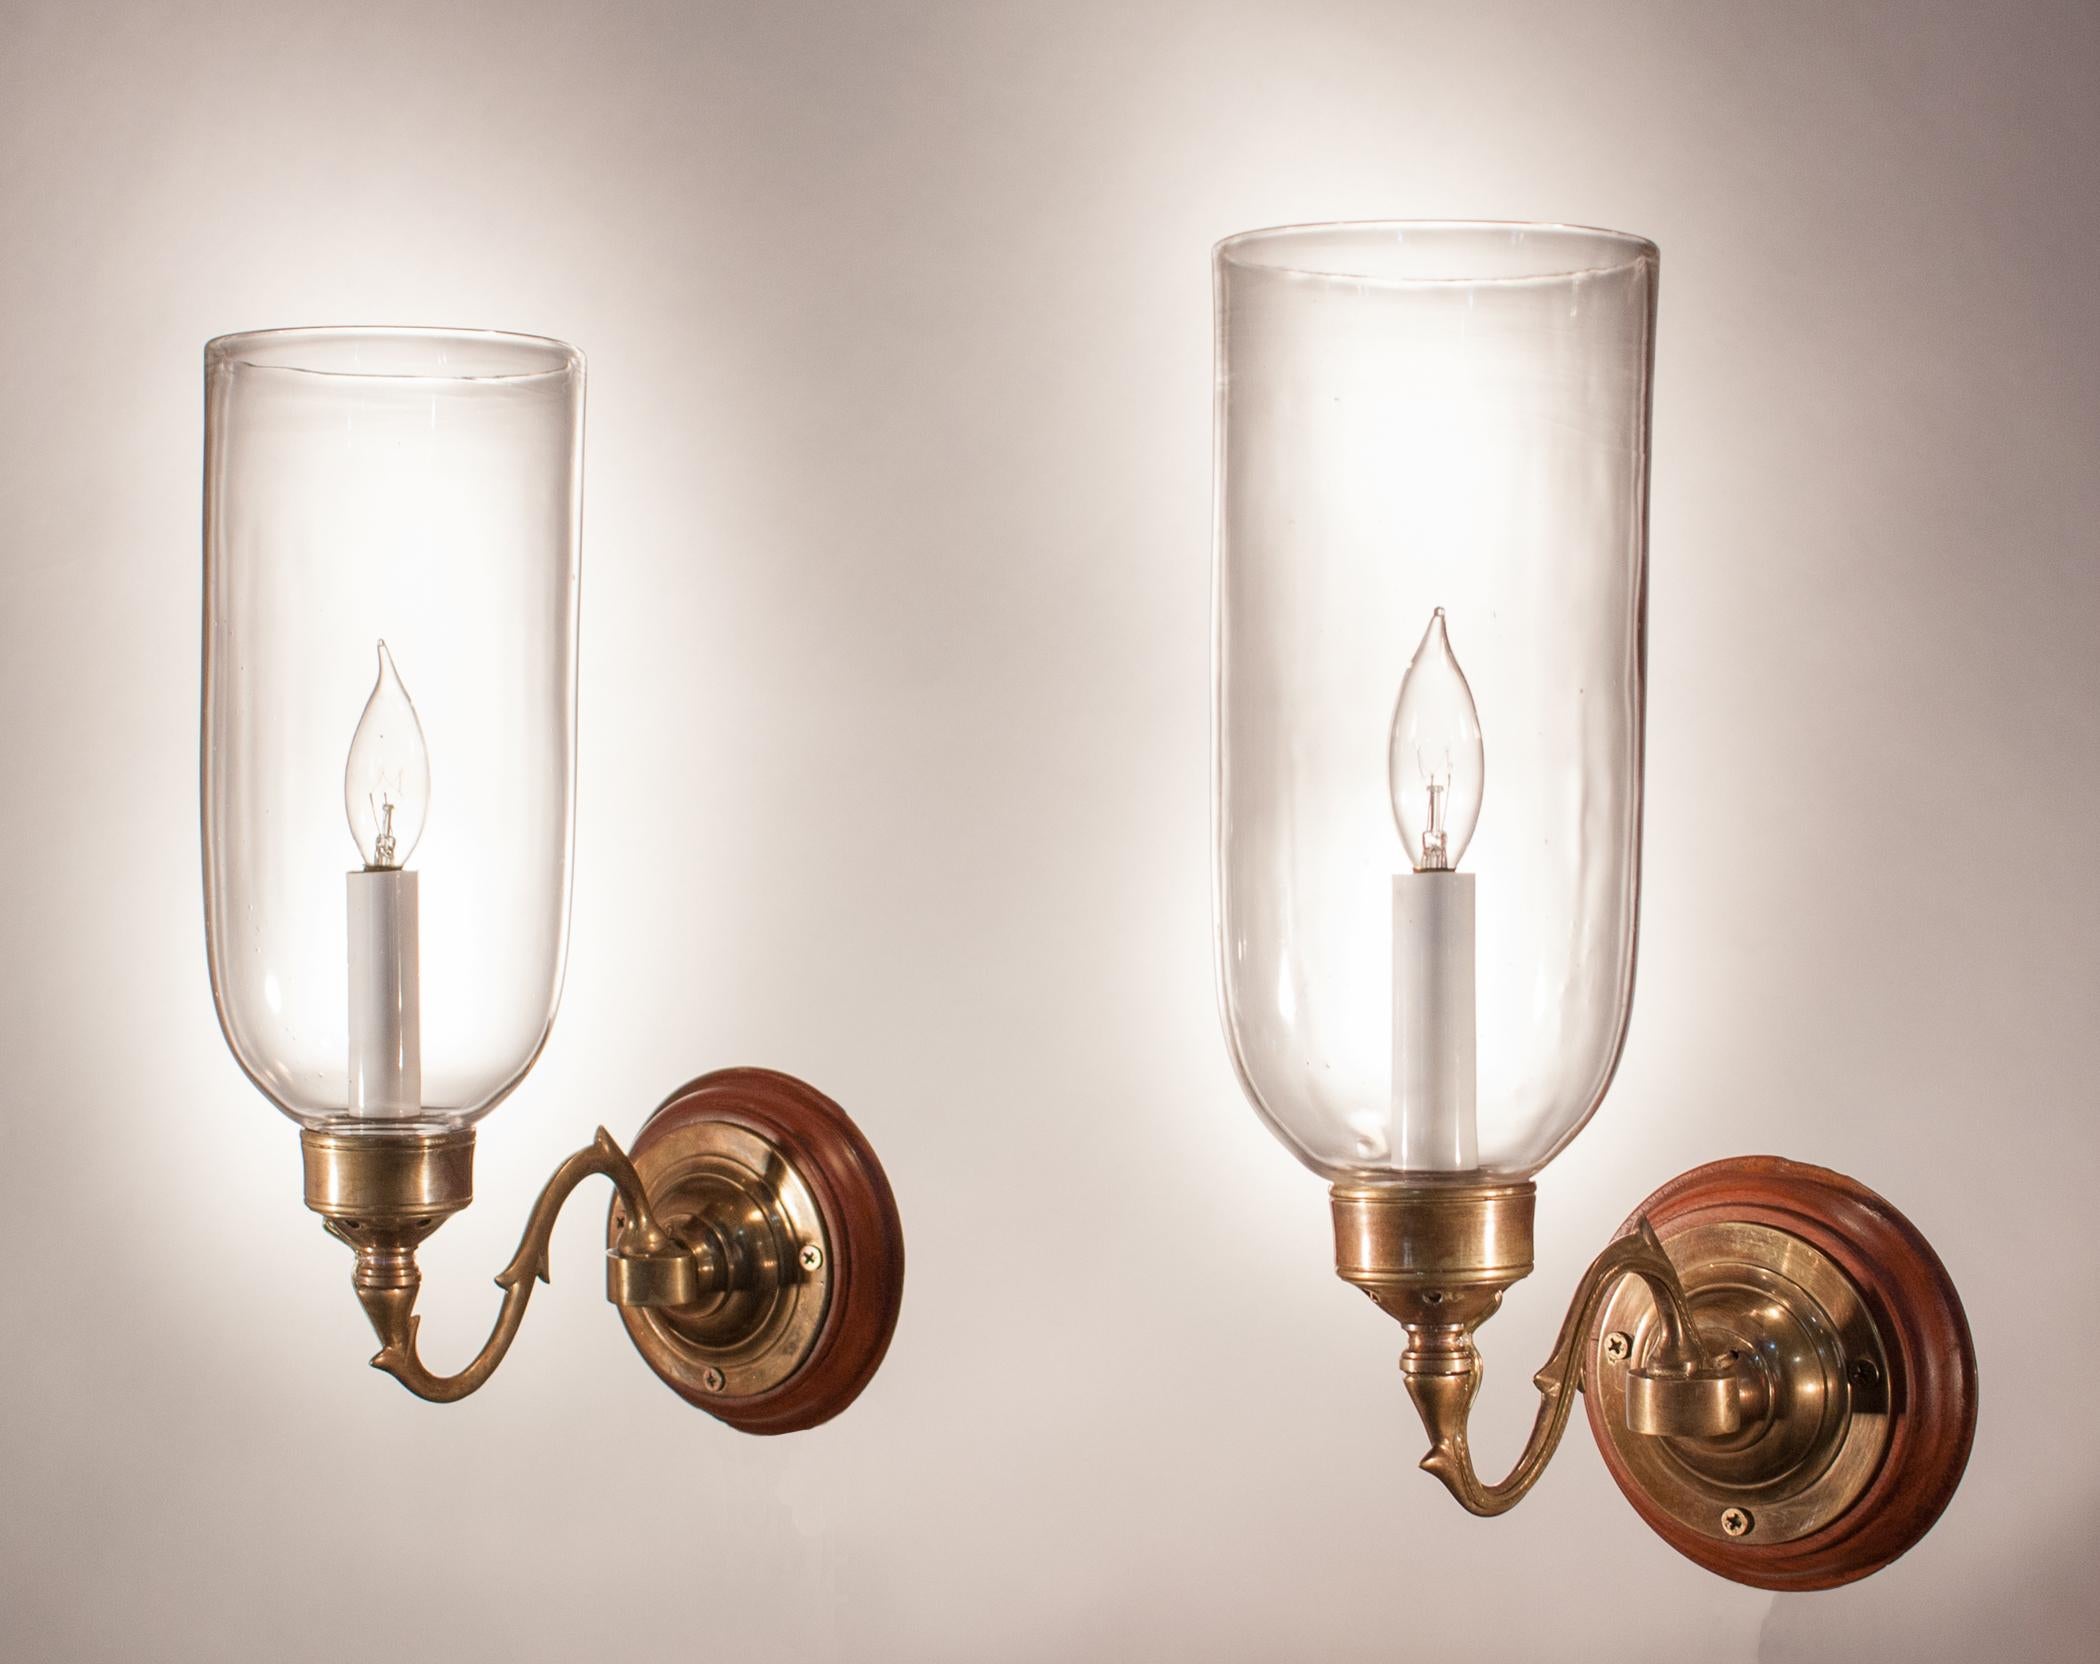 Classic pair of hand blown glass hurricane shades from England, circa 1890. The cylindrical shades have lovely form and their proportions are well-suited to these compact sconce arms. Custom-fabricated brass sconce arms and mahogany backplates (as